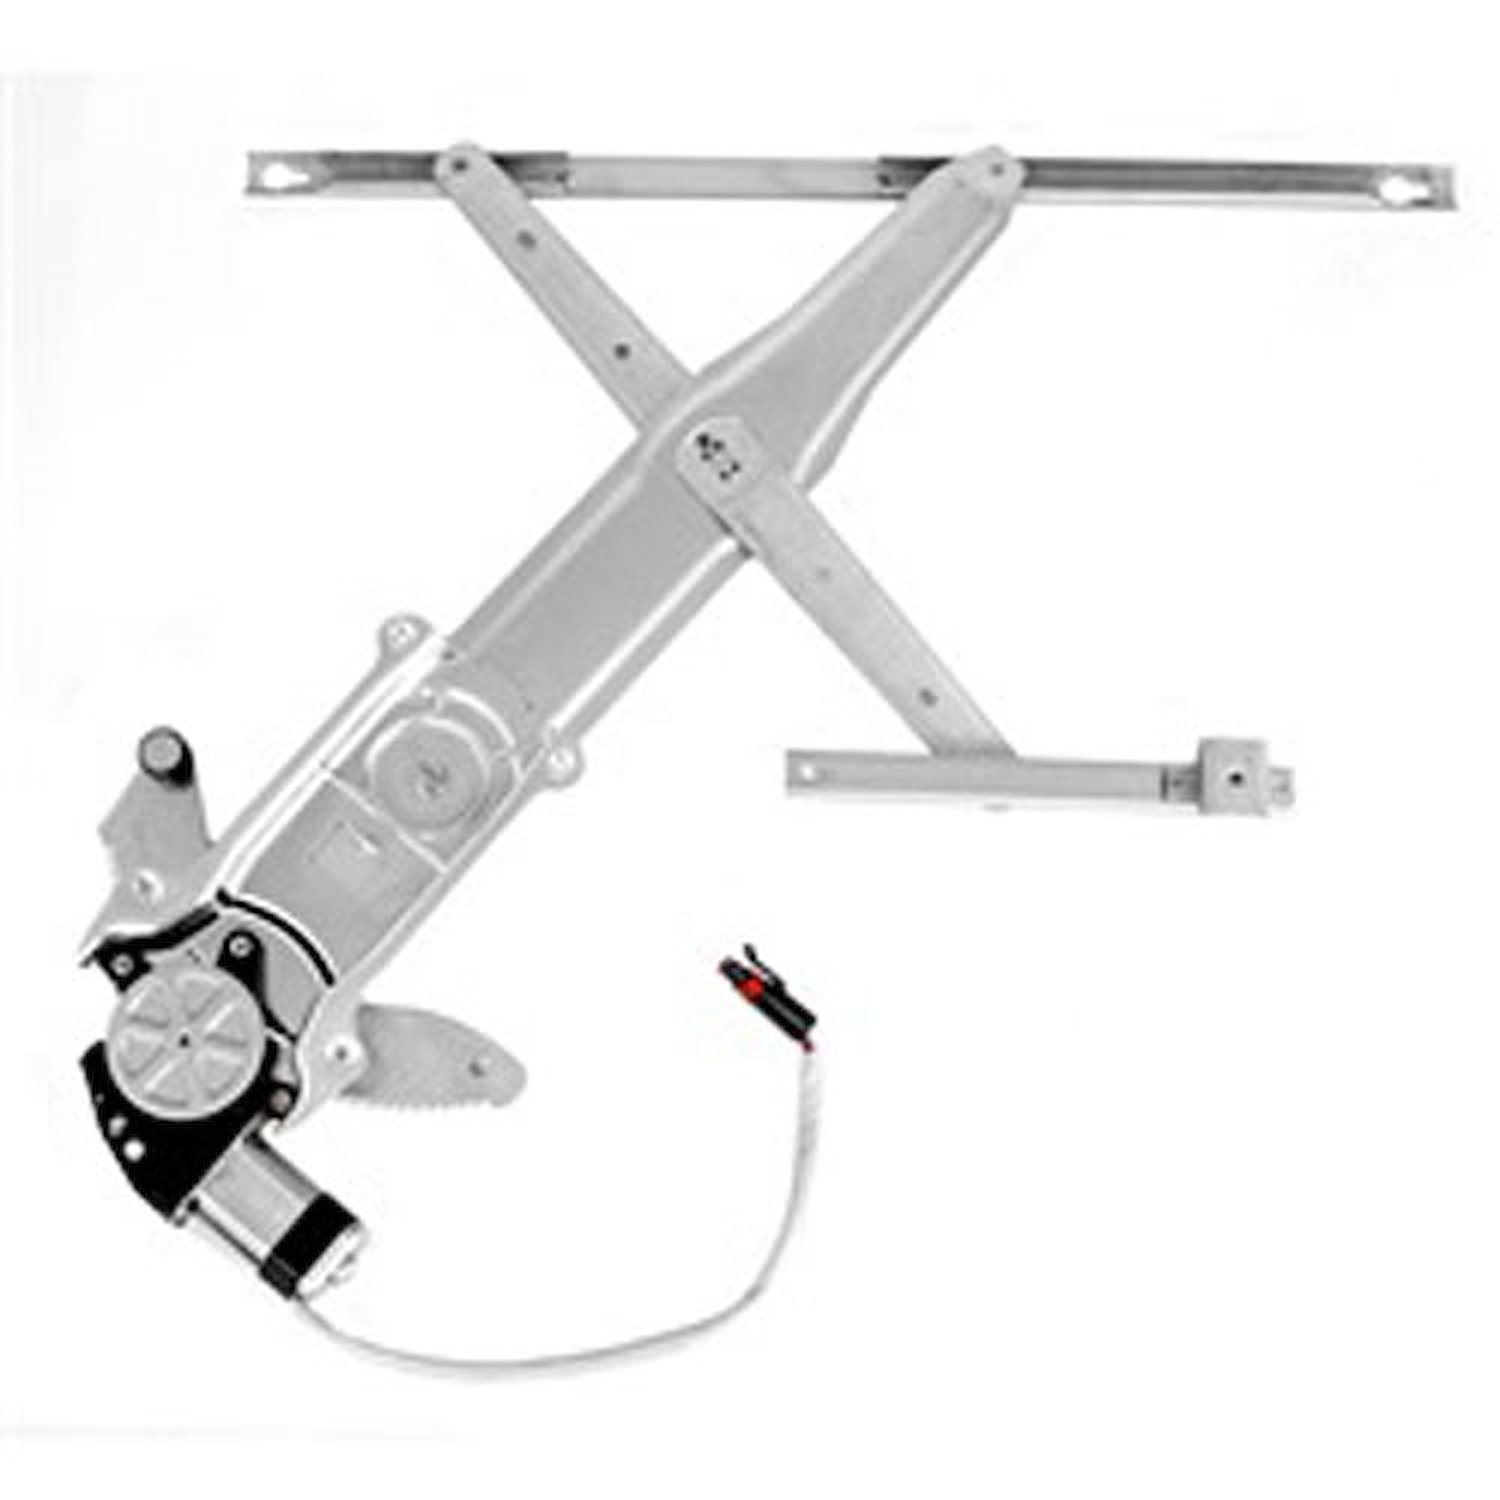 Replacement power window regulator from Omix-ADA, Fits left front window on 07-16 Jeep Wrang